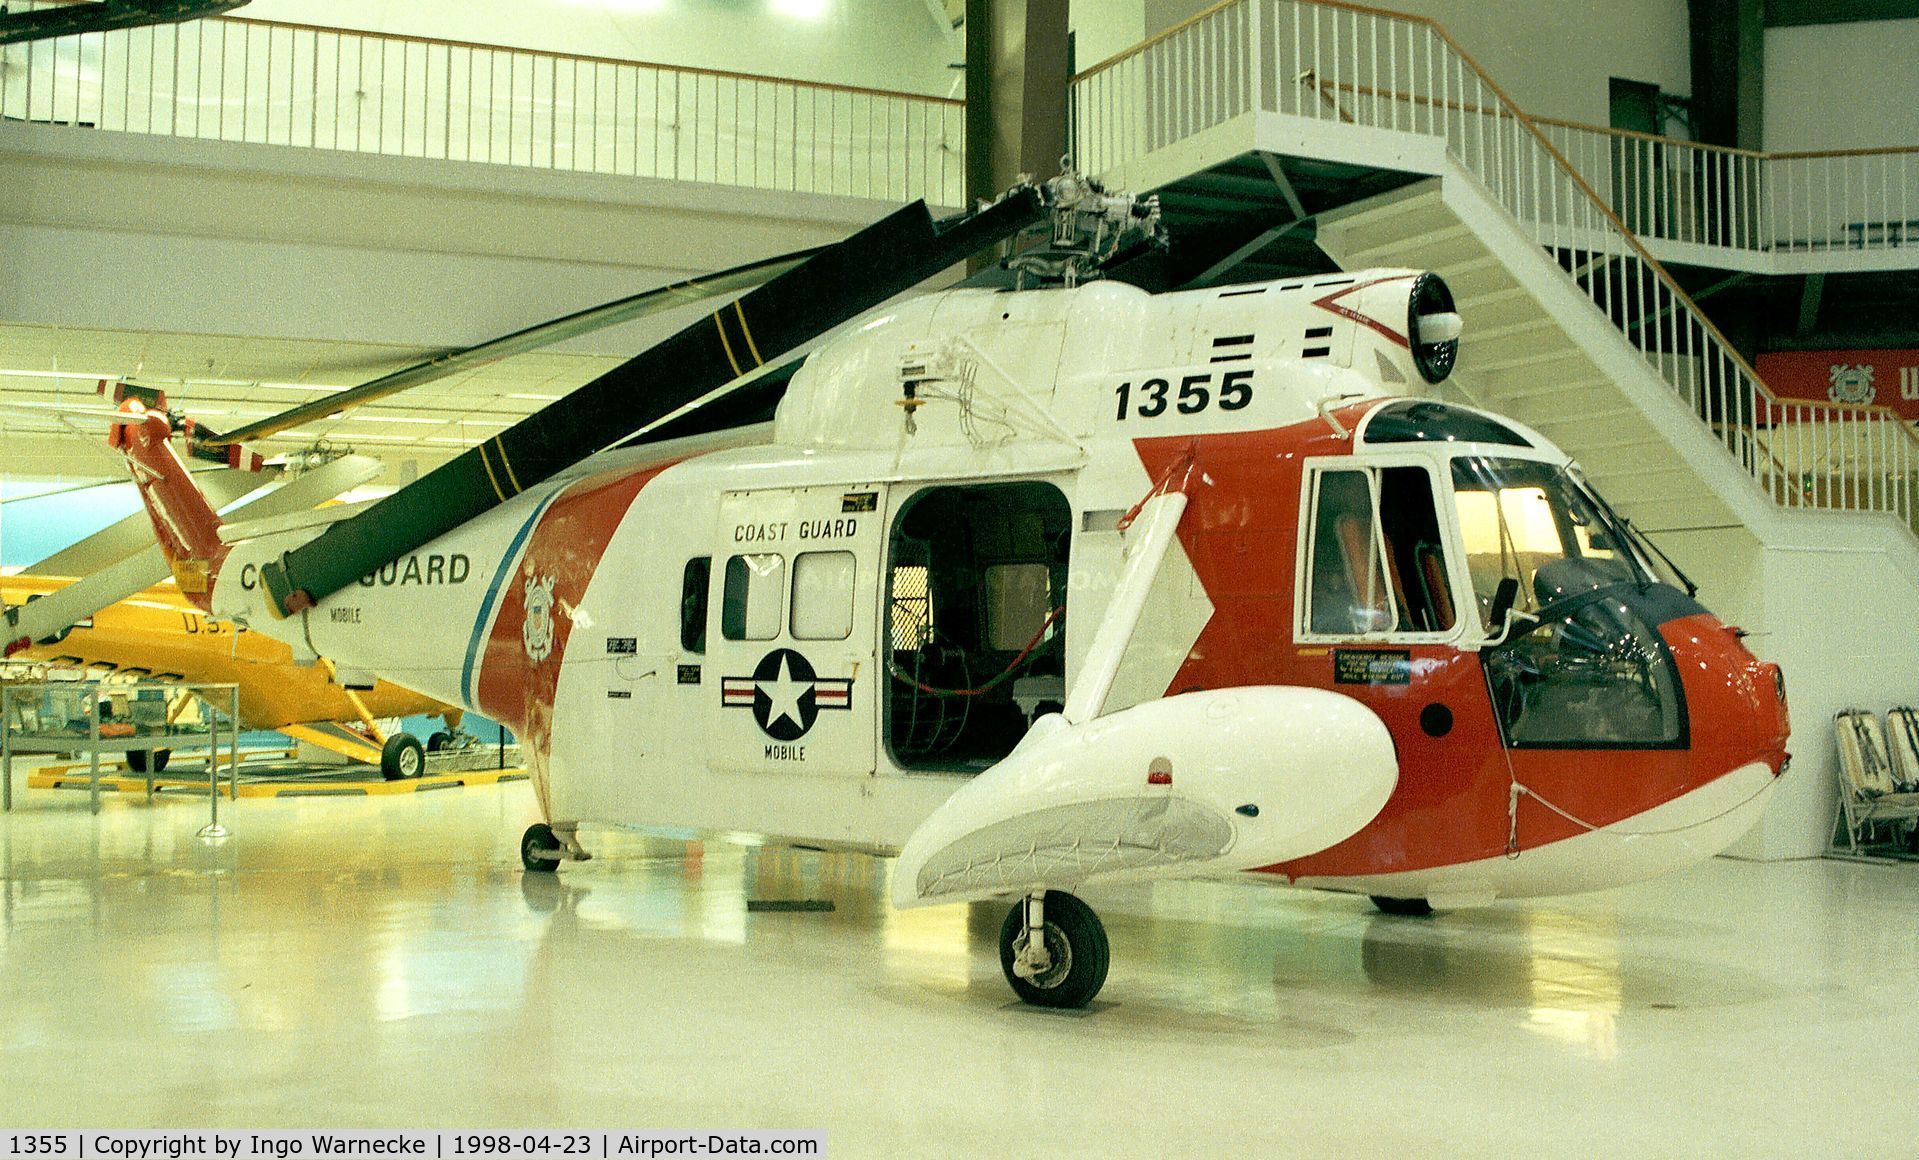 1355, Sikorsky HH-52A Sea Guard C/N 62.024, Sikorsky HH-52A Sea Guardian at the Museum of Naval Aviation, Pensacola FL